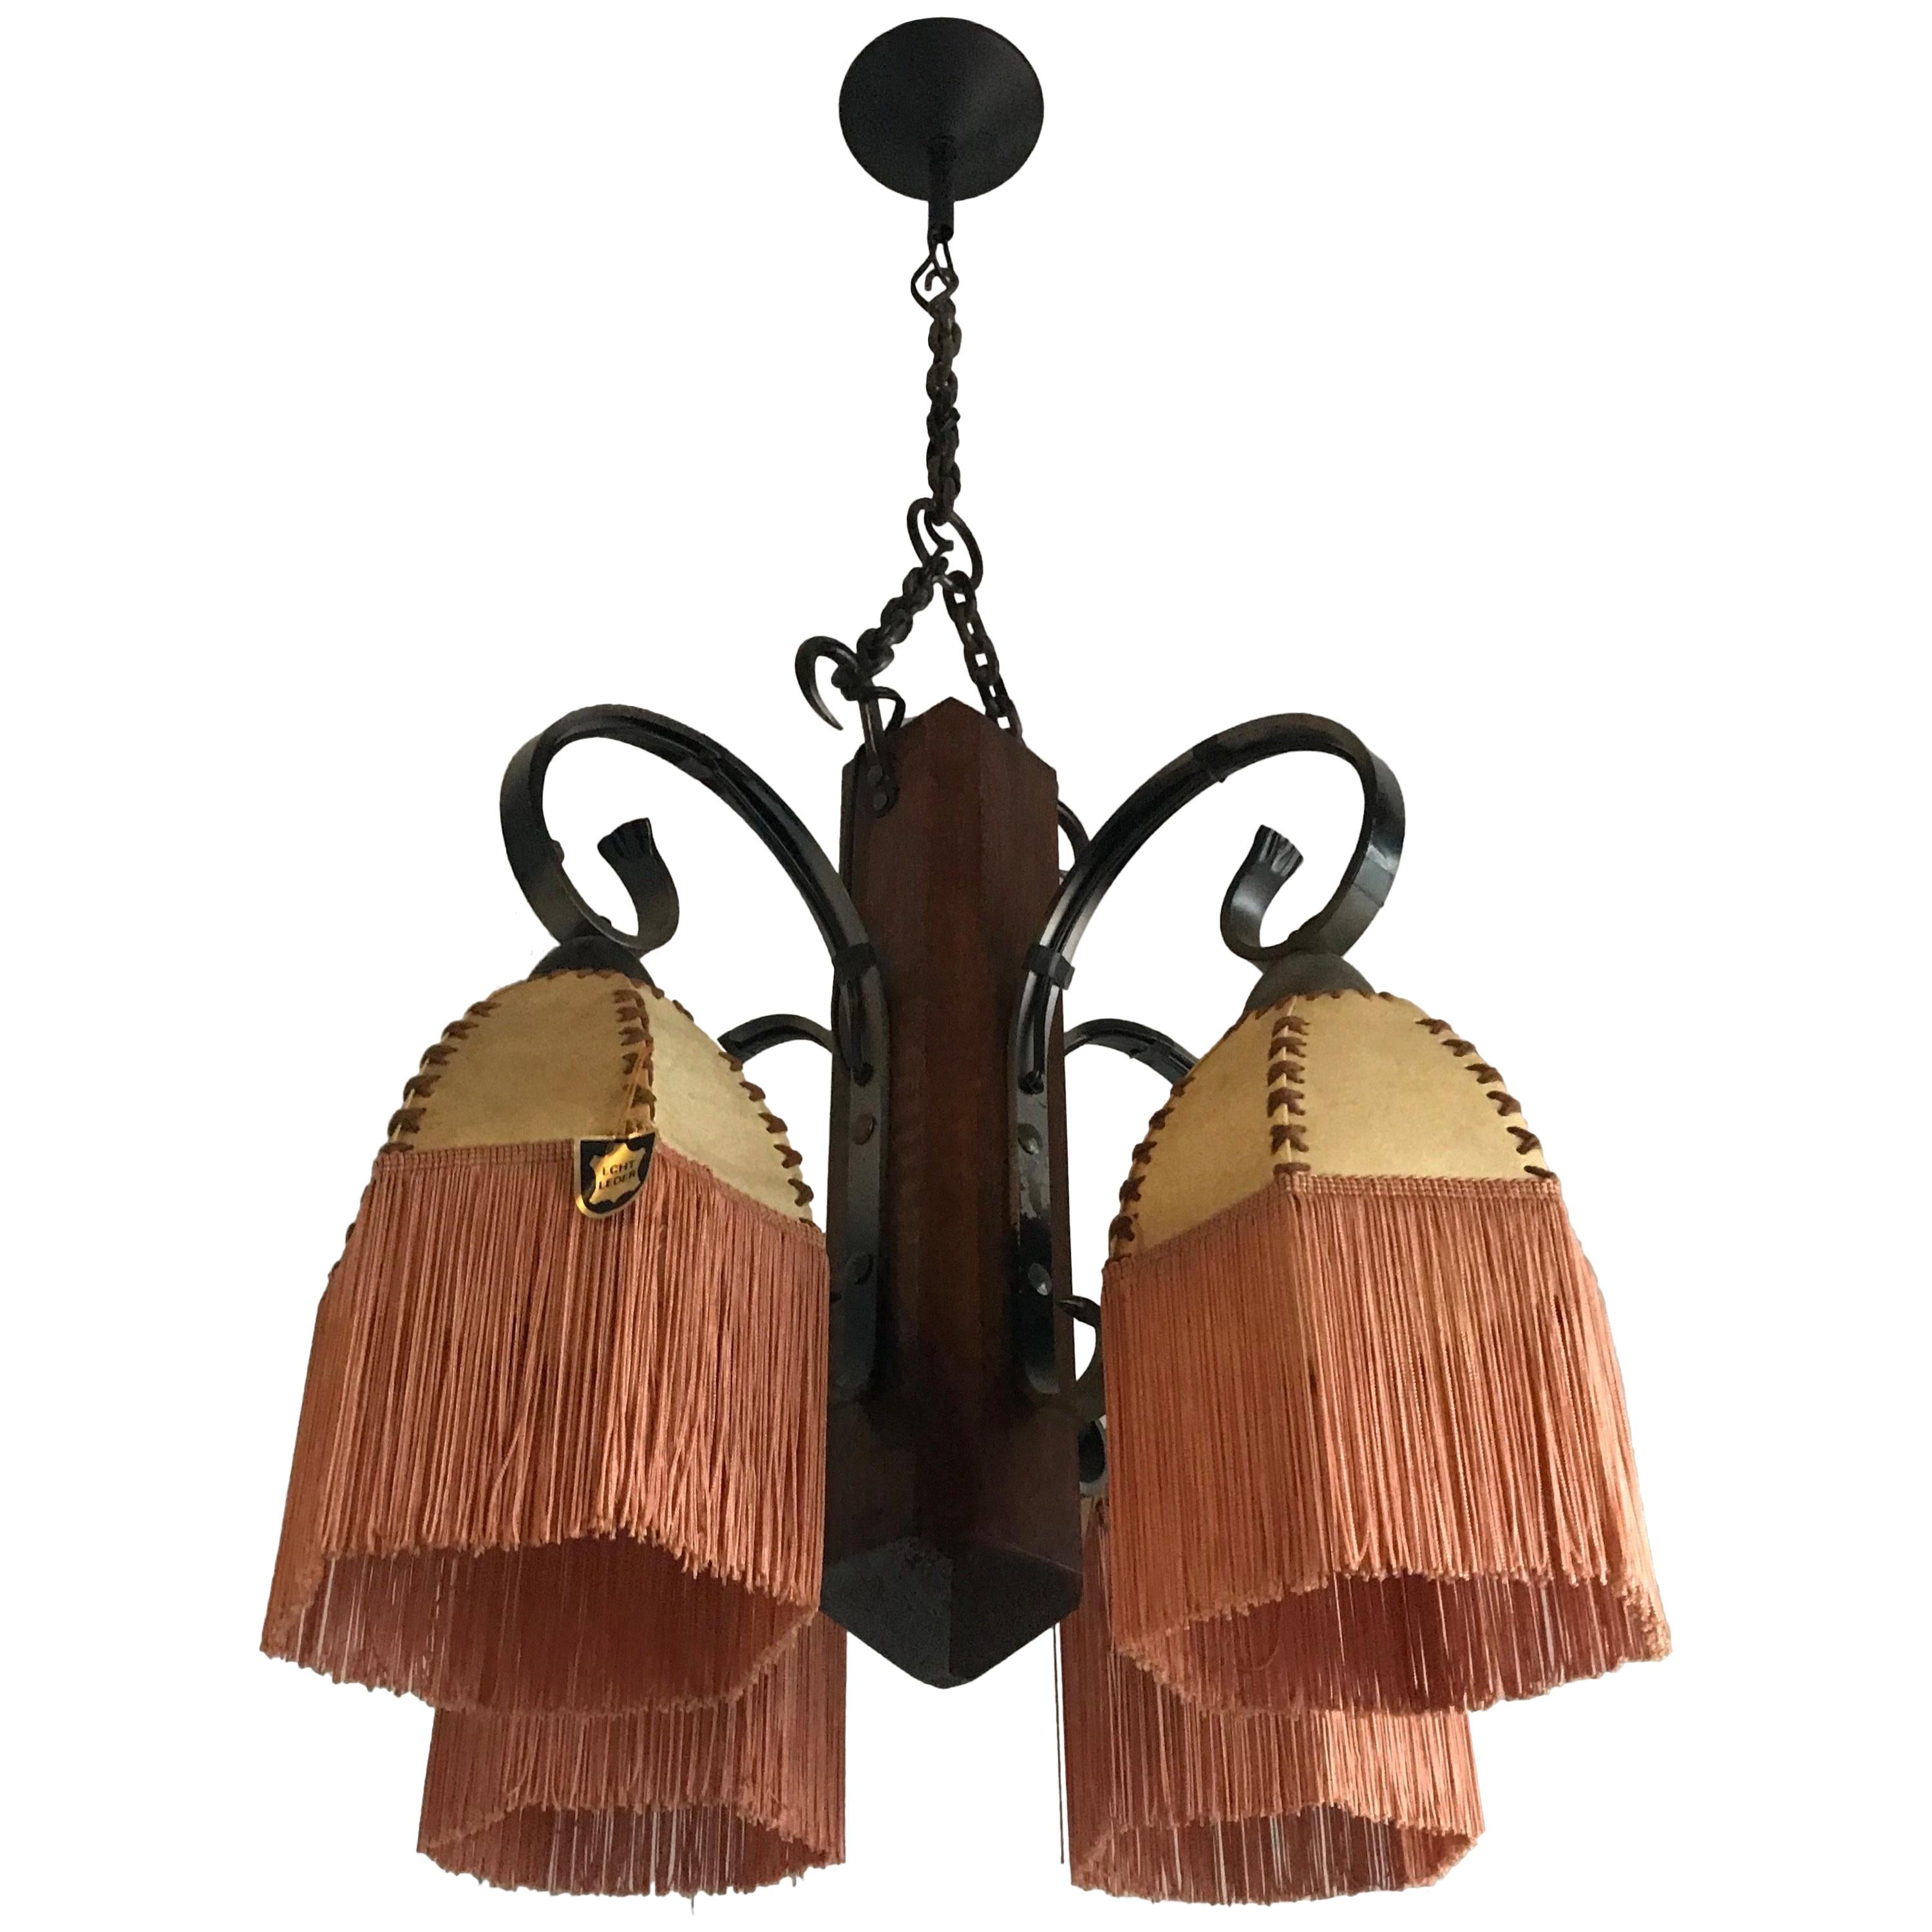 Rare Wrought Iron and Wood Pendant Light Fixture with Leather Shades and Fringes For Sale